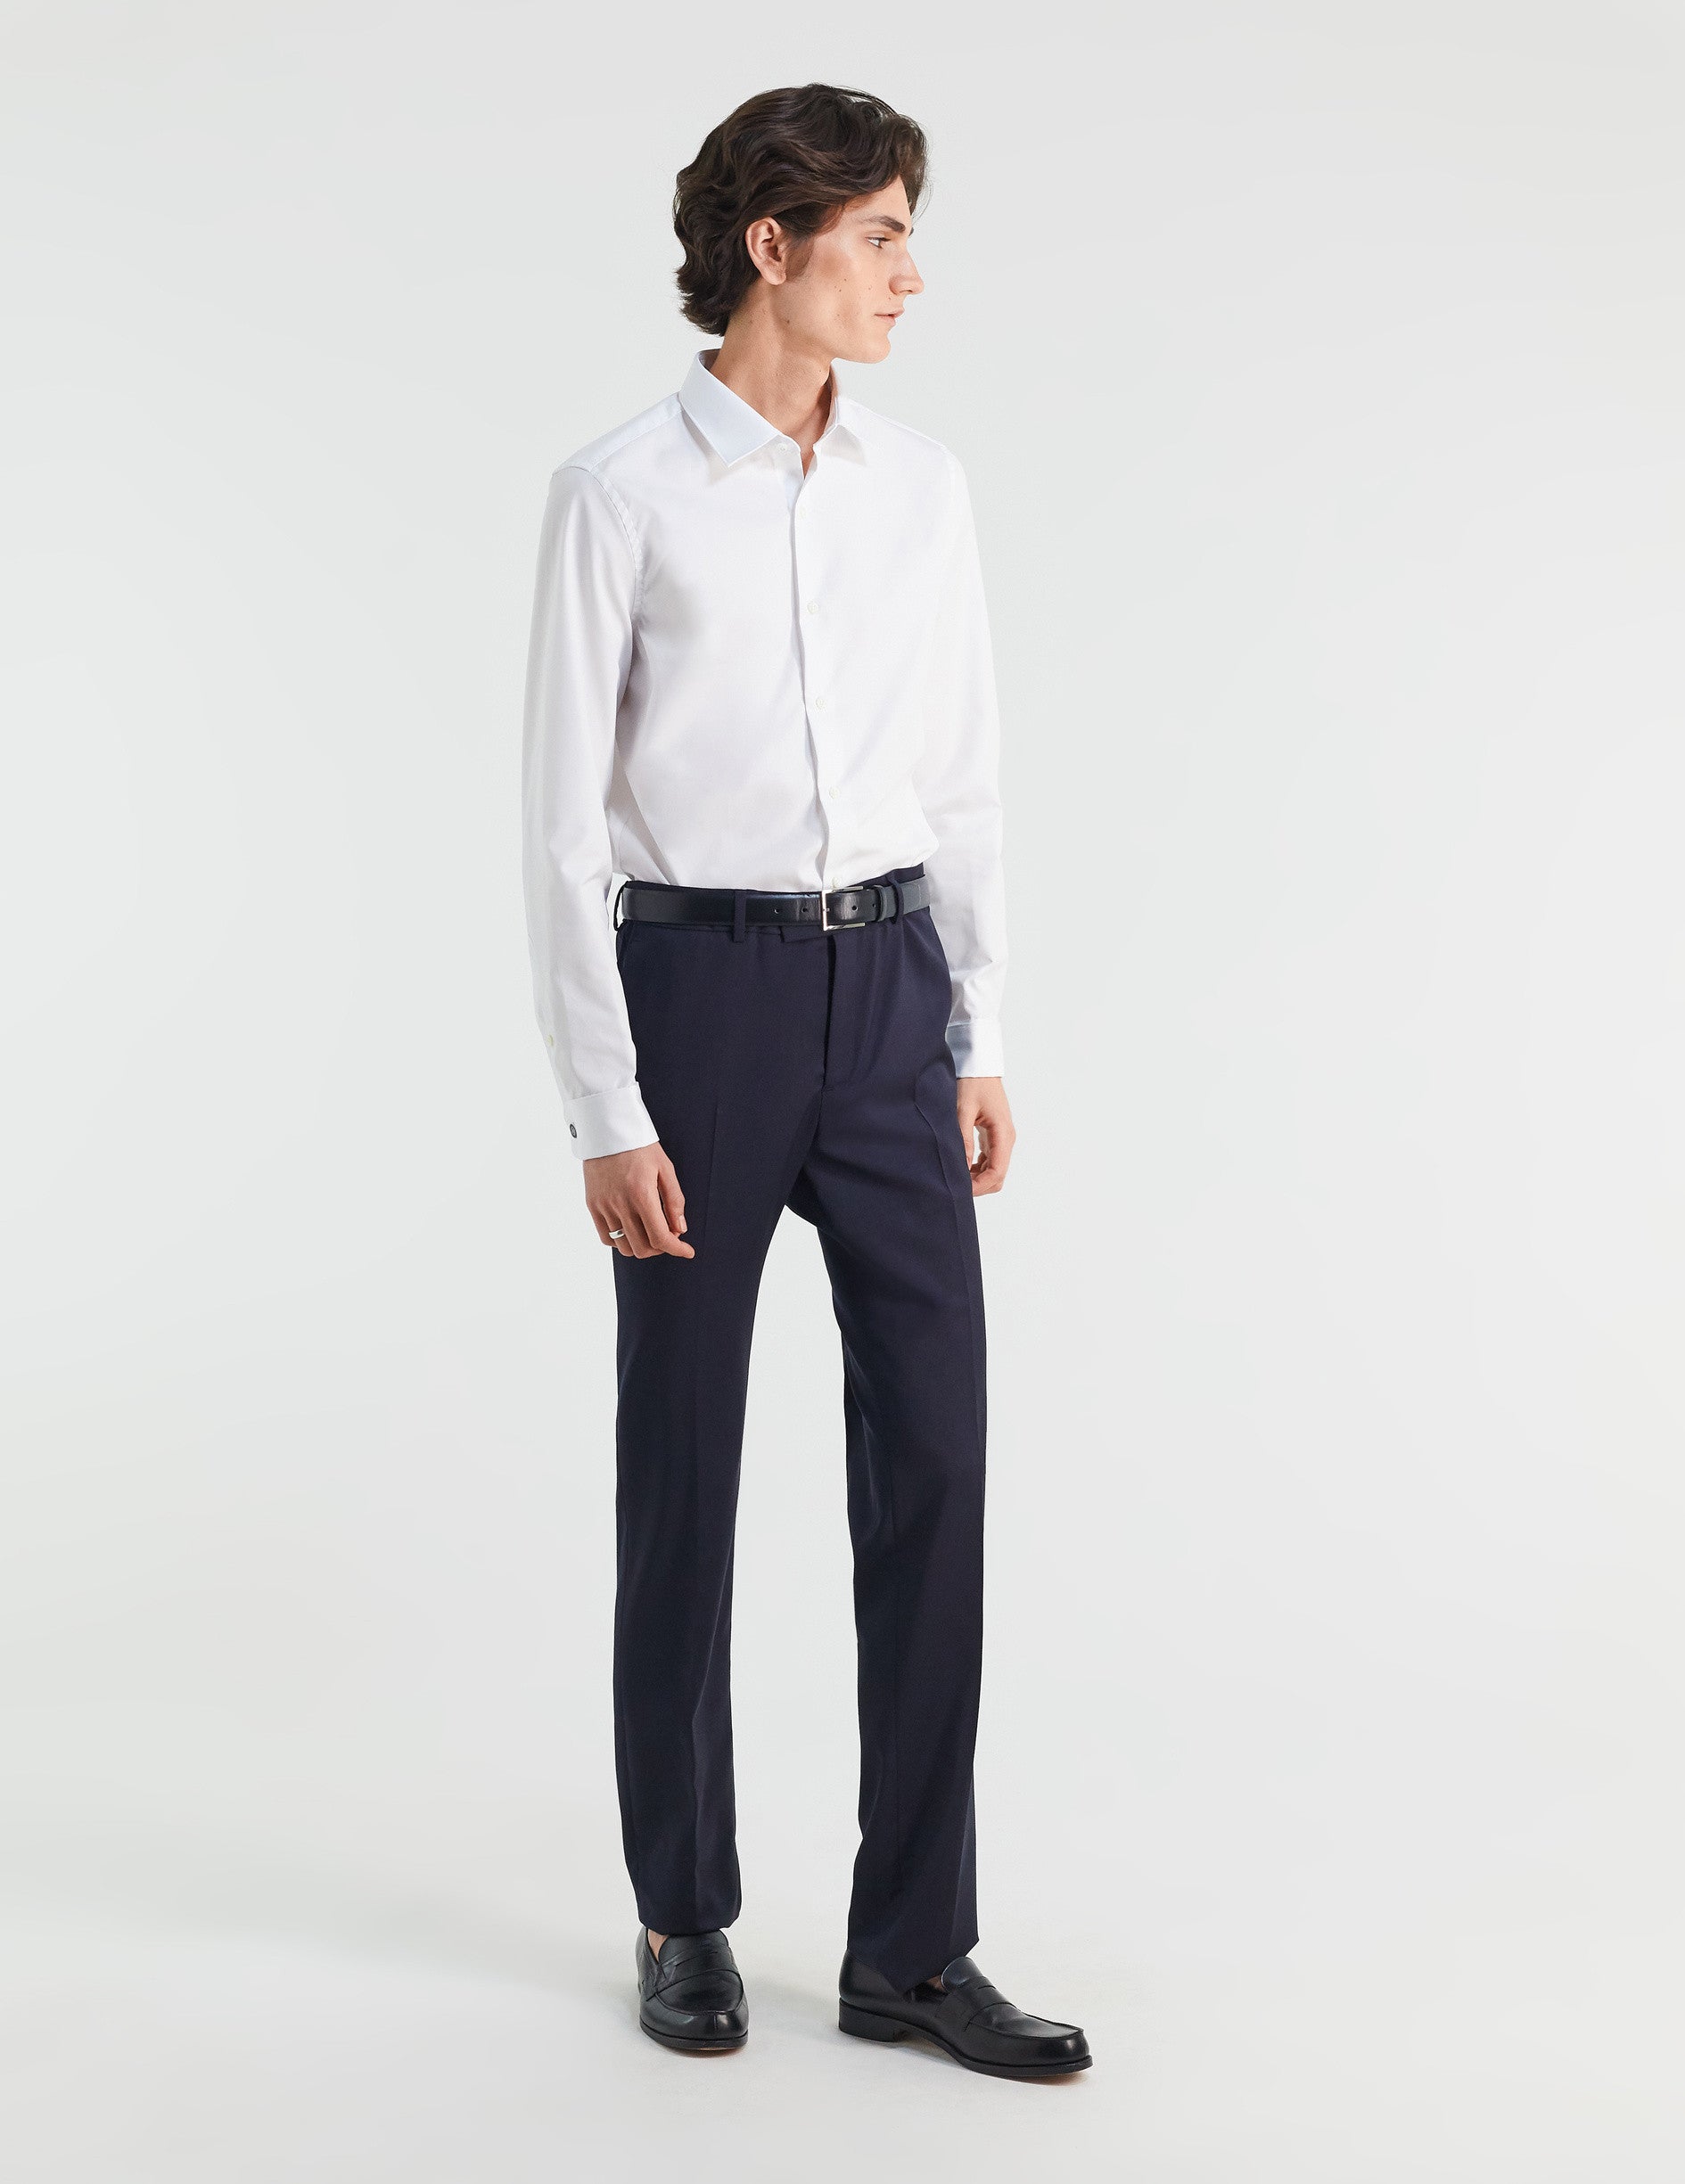 Semi-fitted white shirt - Poplin - Figaret Collar - French Cuffs